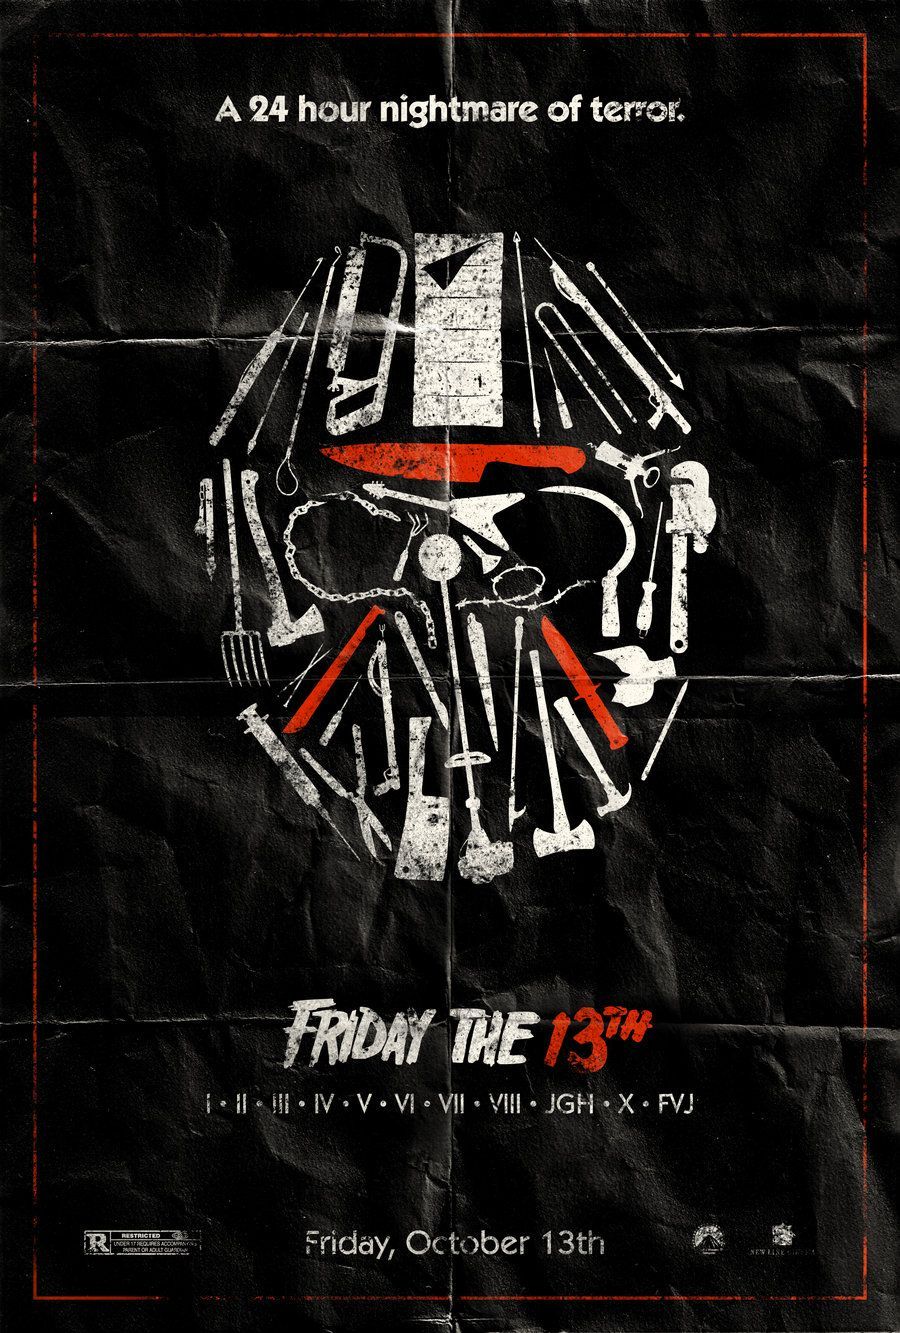 Mini Horror Reviews - Friday The 13th (1980) by techgnotic on ...